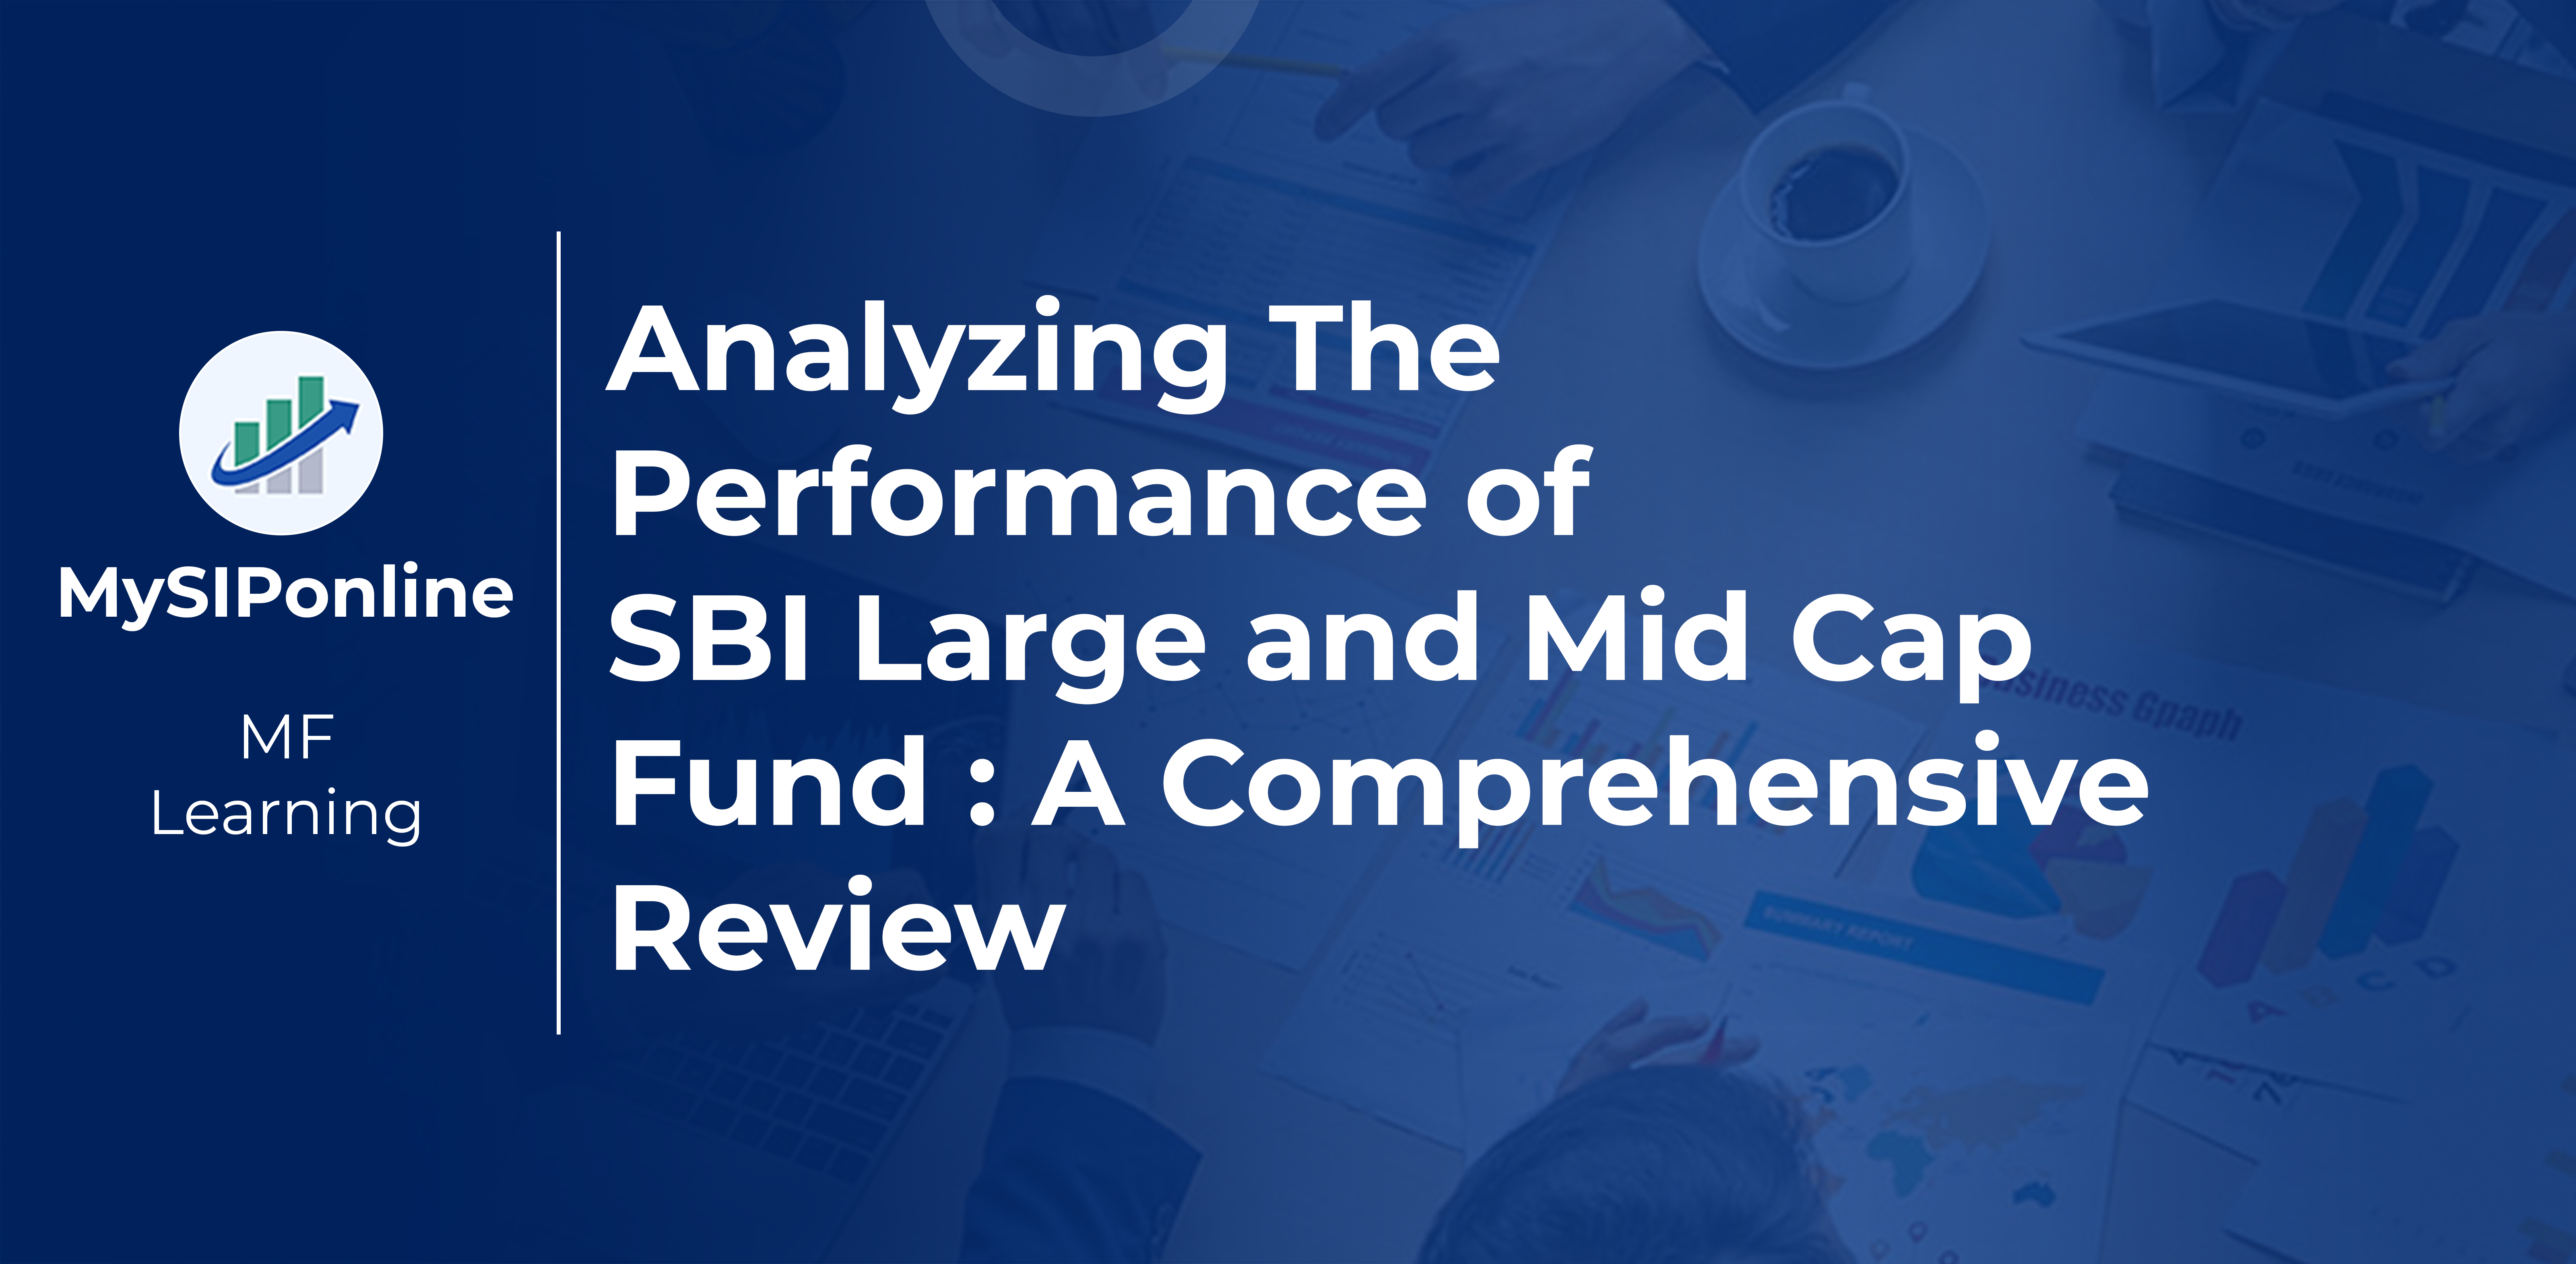 Analyzing the Performance of SBI Large and Mid Cap Fund: A Comprehensive Review